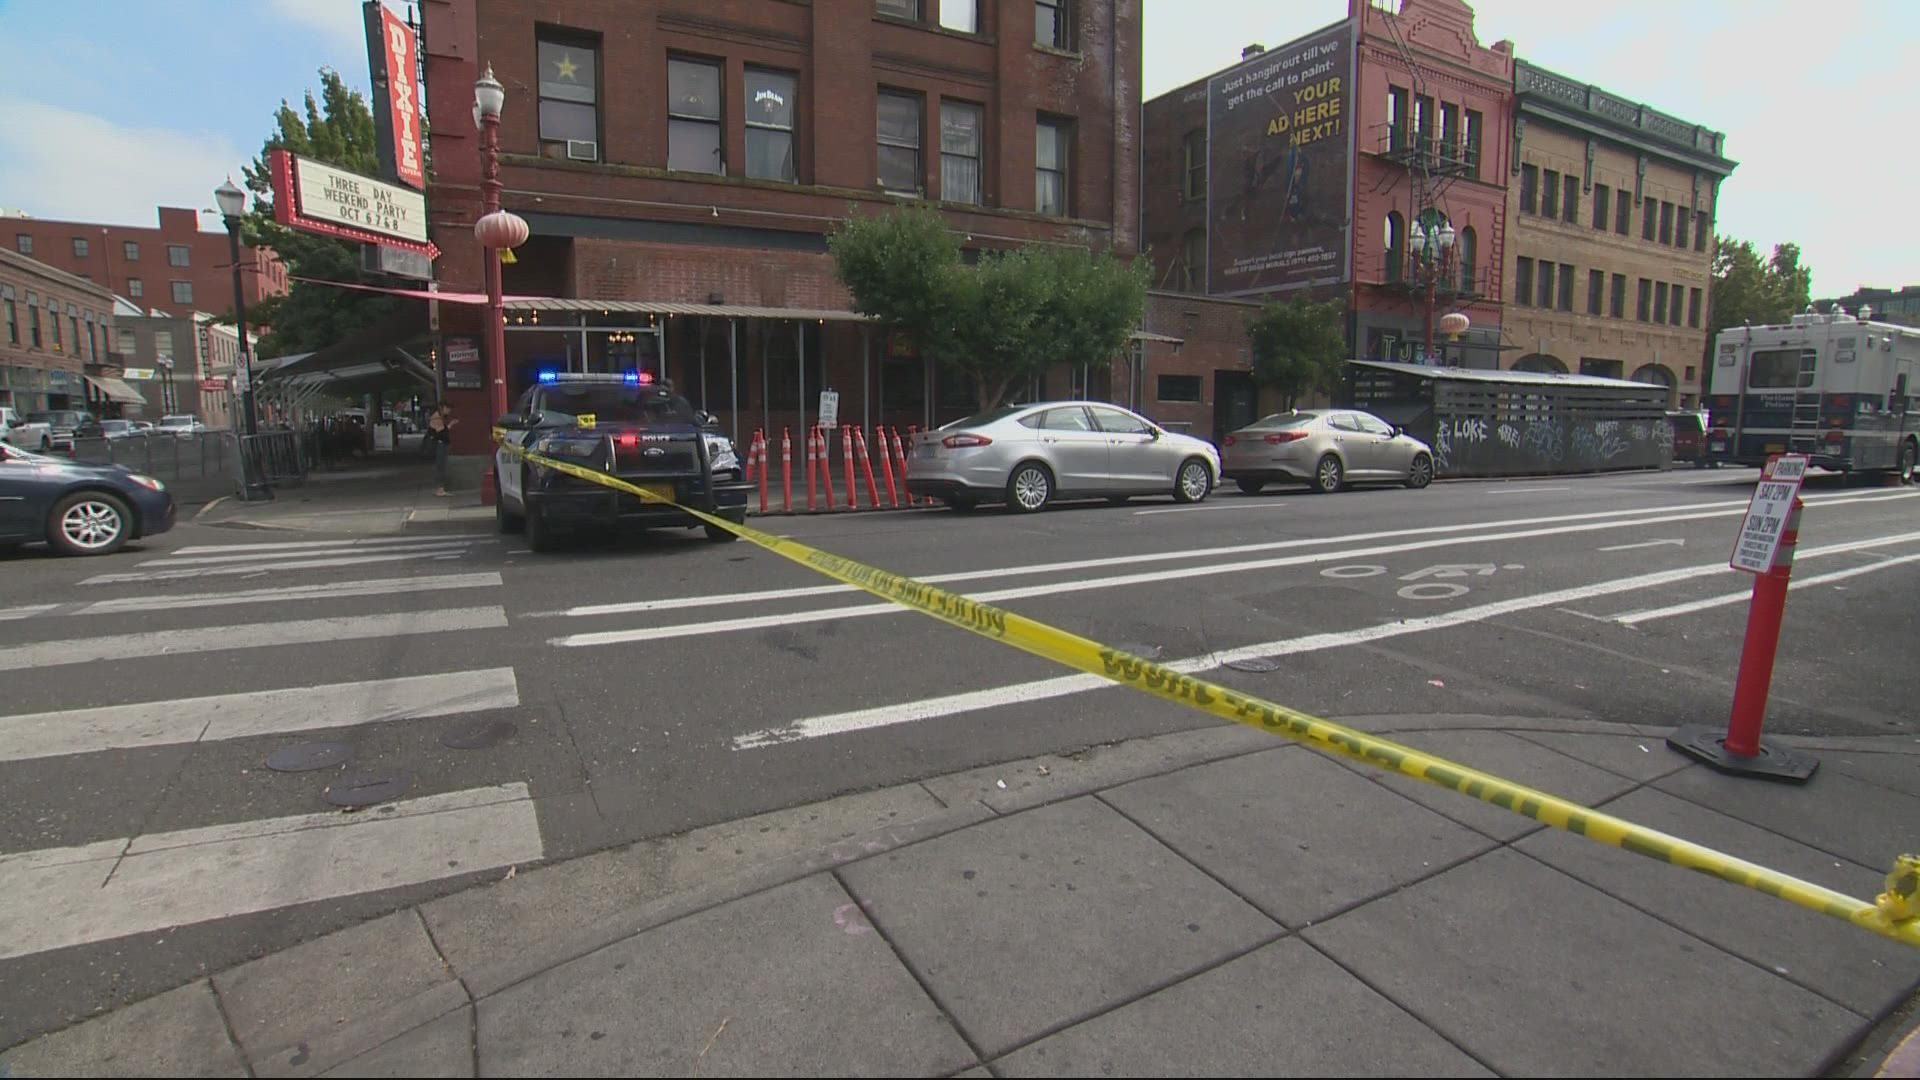 The second suspect, Kalil Ford, 20, was arrested earlier this week in connection with the brutal assault of a woman in the Pearl District.